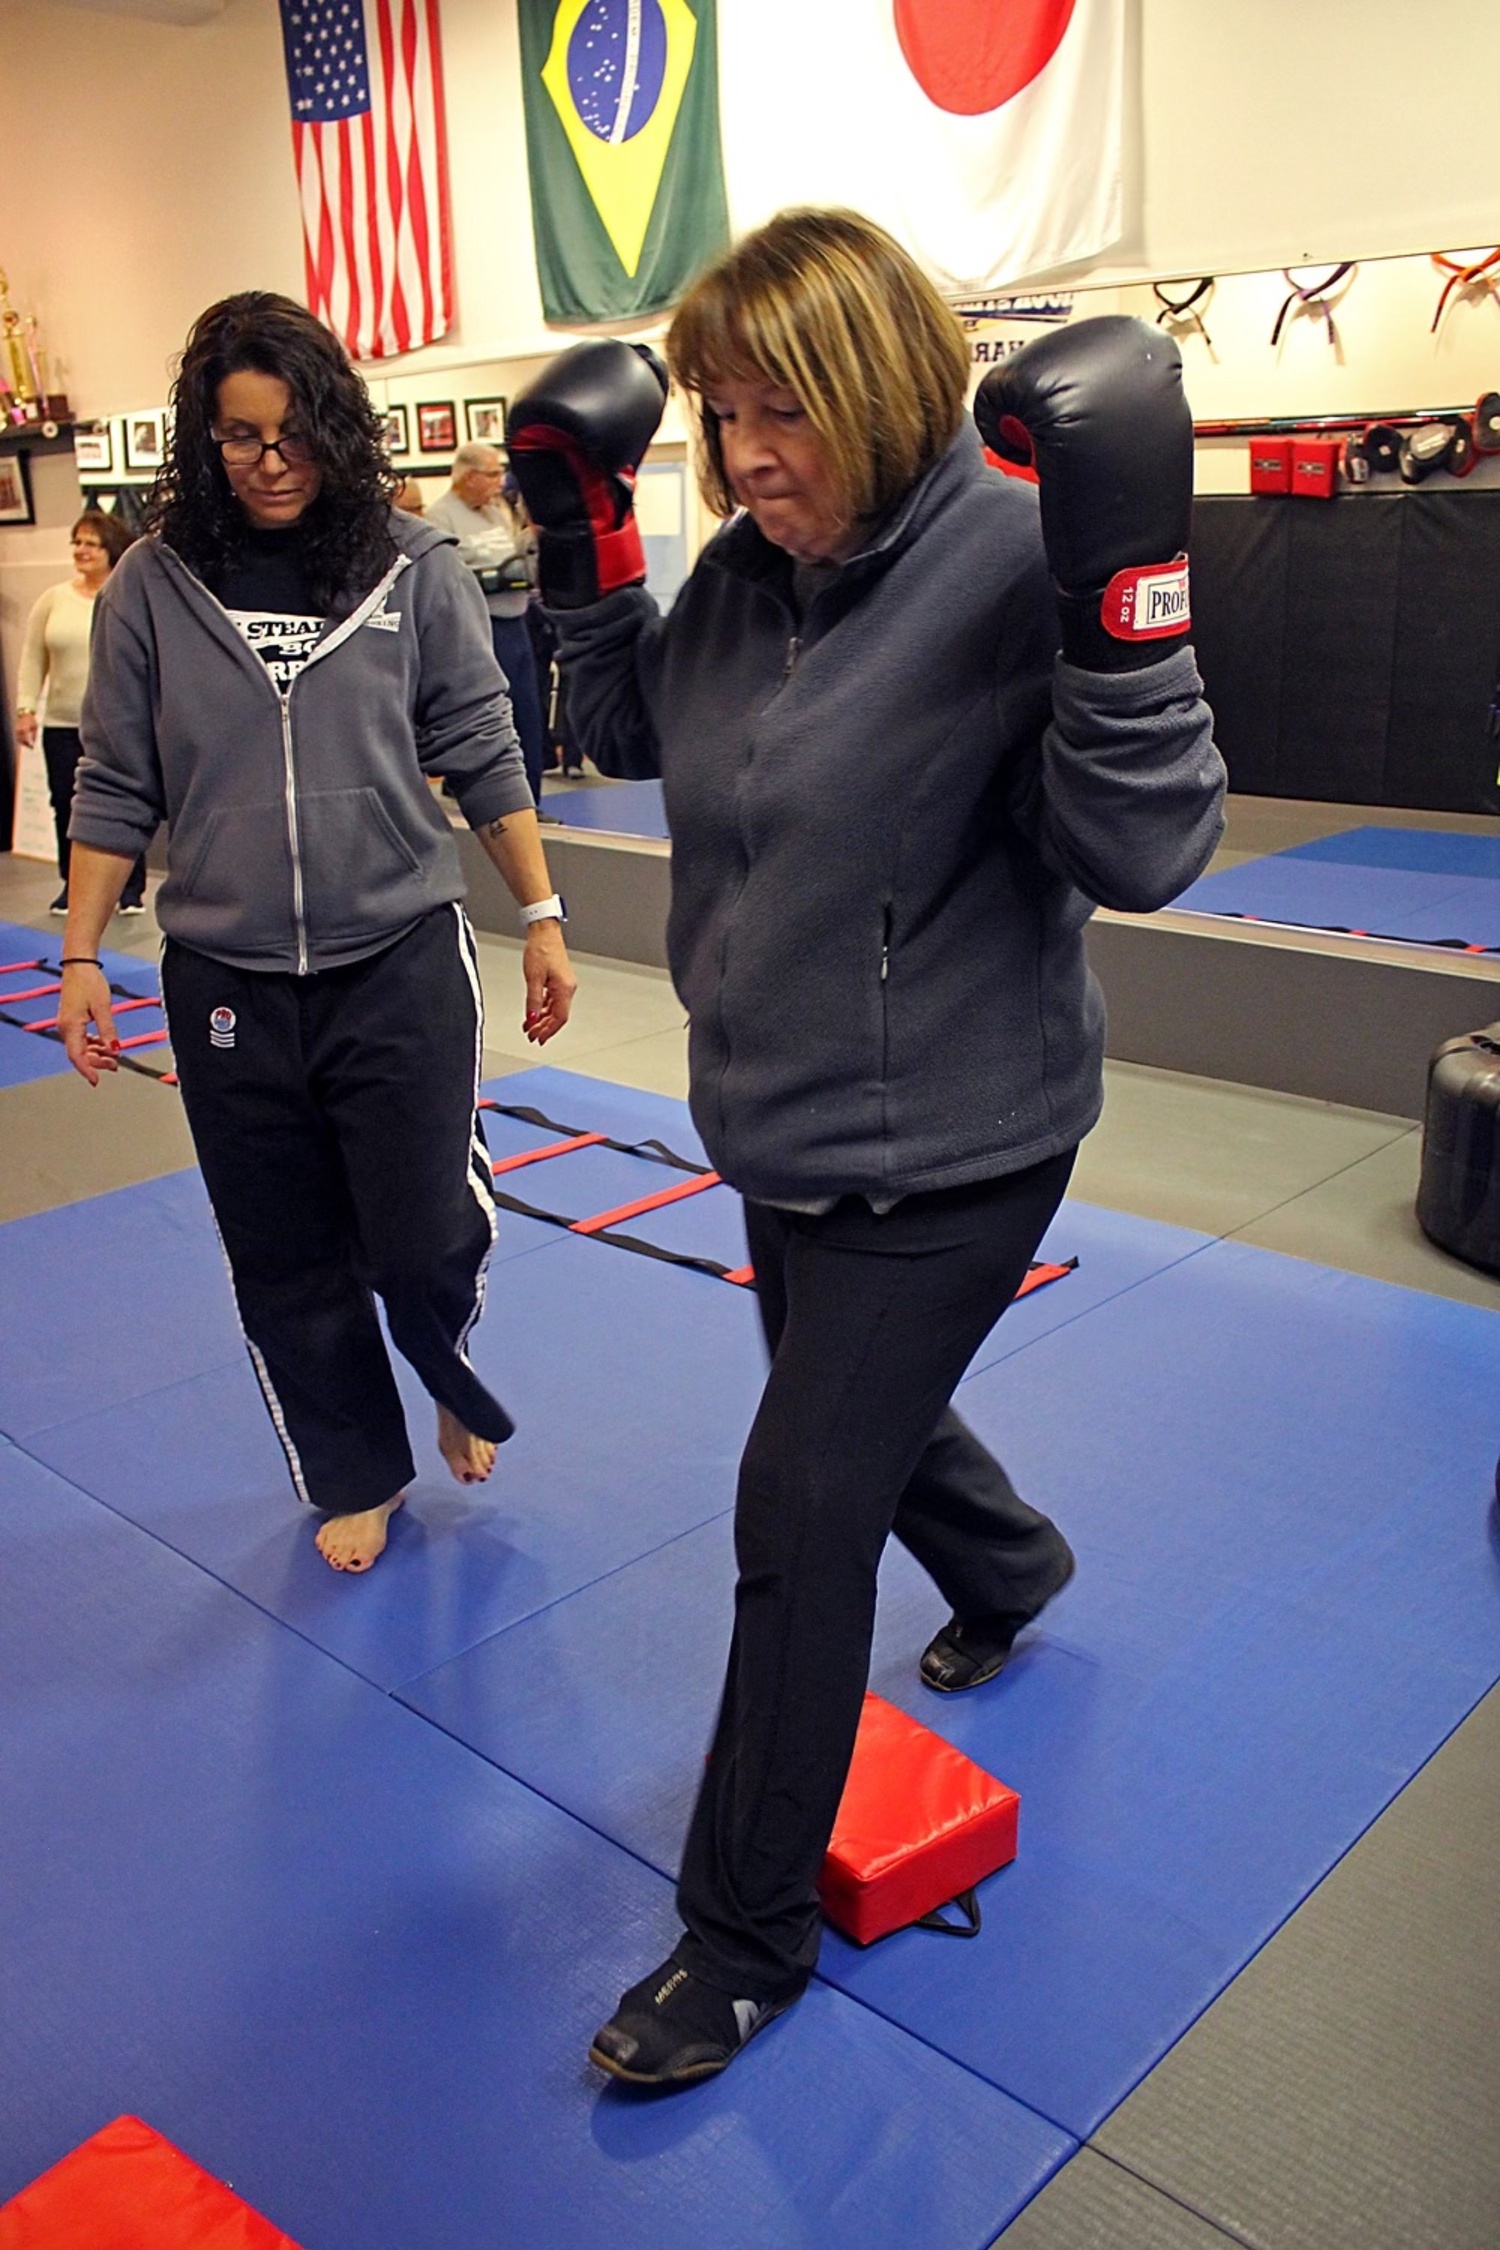 Michelle Del Giorno works with Pamela Turk during a Rock Steady Boxing class at Epic Martial Arts in Sag Harbor. COURTESY MICHELLE DEL GIORNO